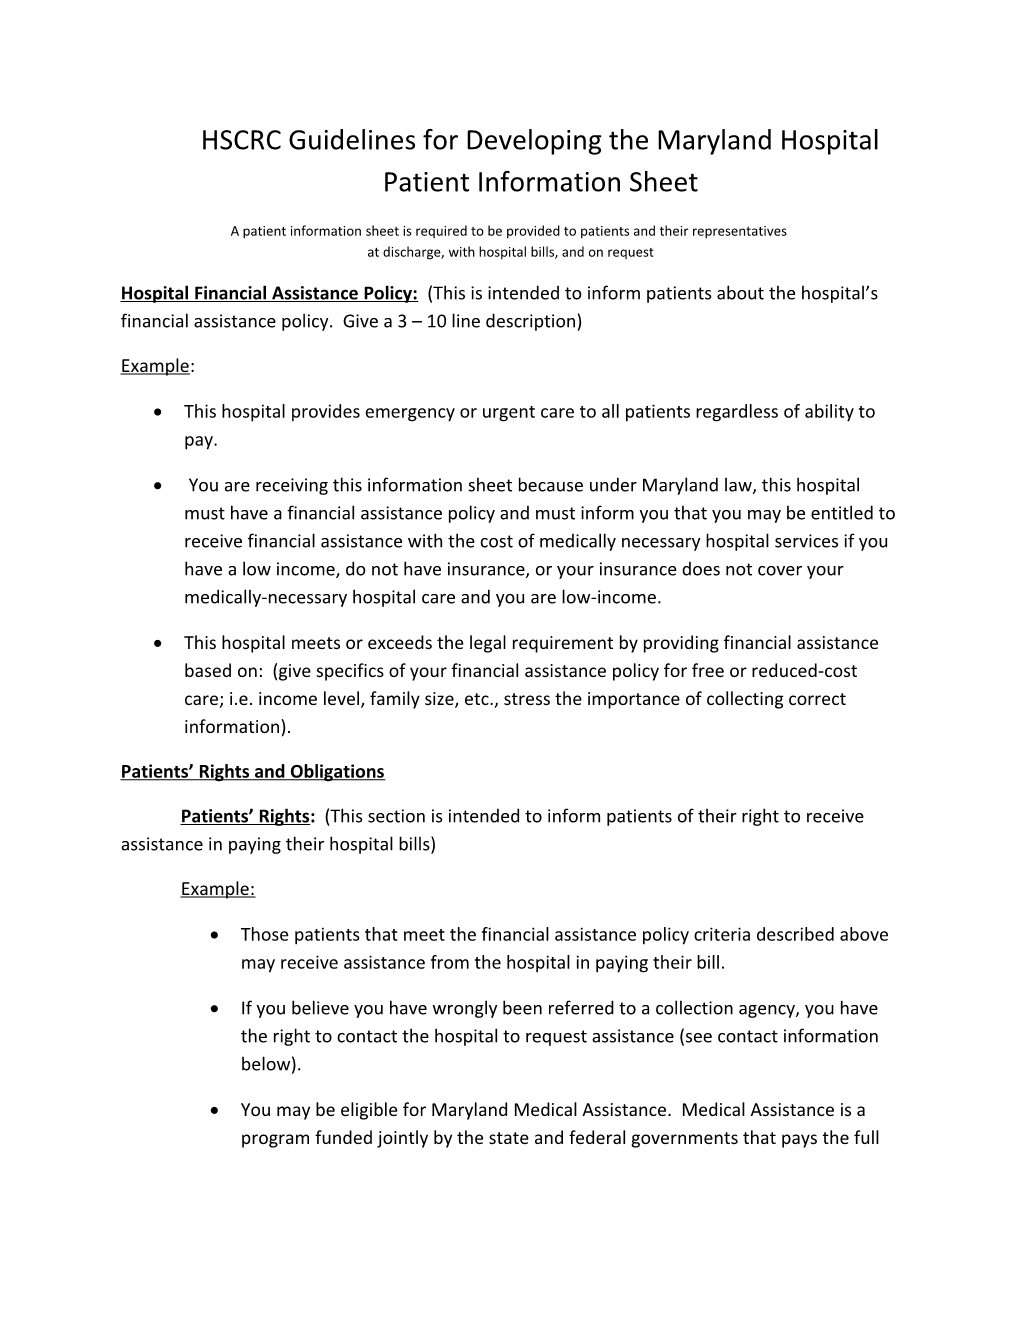 HSCRC Guidelines for Developing Themaryland Hospital Patient Information Sheet